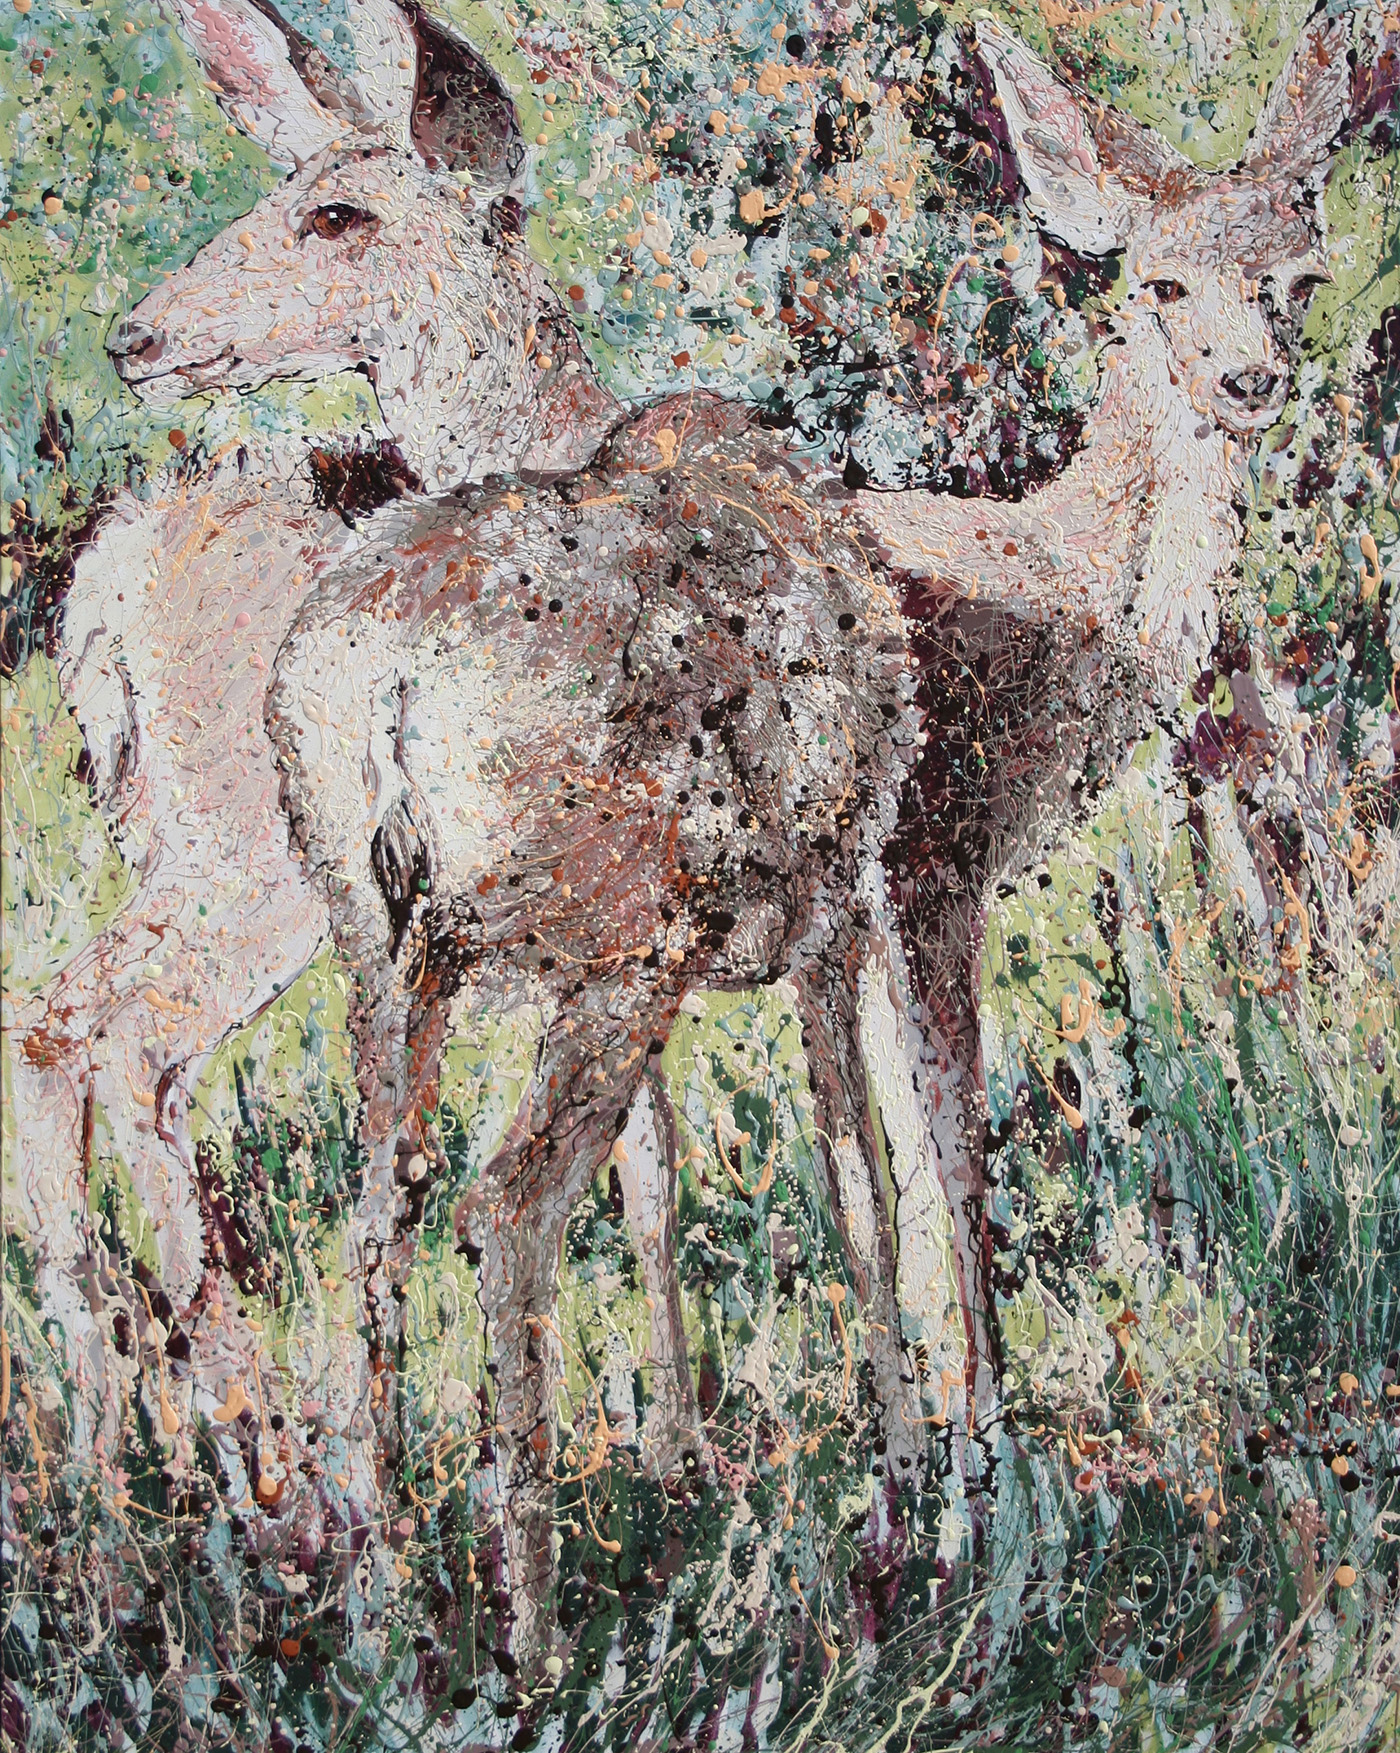 Mule Deer Latex Enamel Painting on Gallery Wrapped Canvas by Fort Collins, Colorado Artist Lisa Cameron Russell